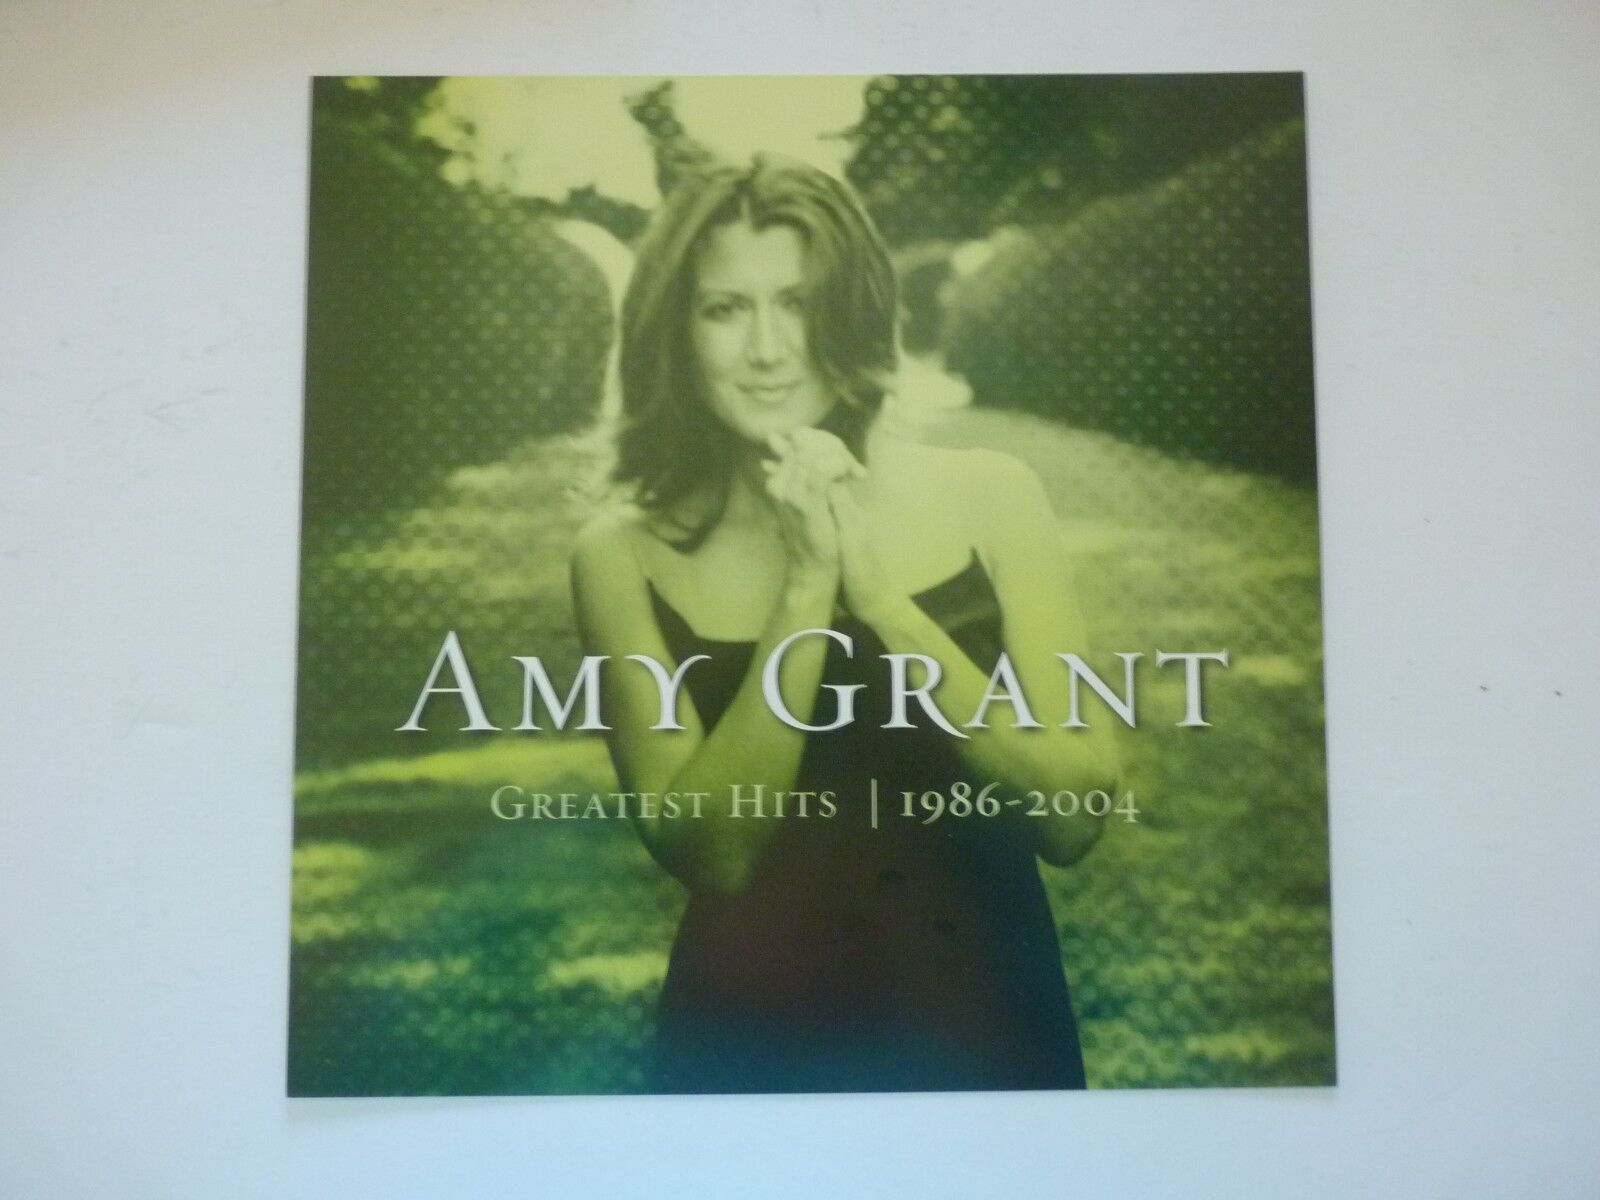 Amy Grant Greatest Hits LP Record Photo Poster painting Flat 12x12 Poster